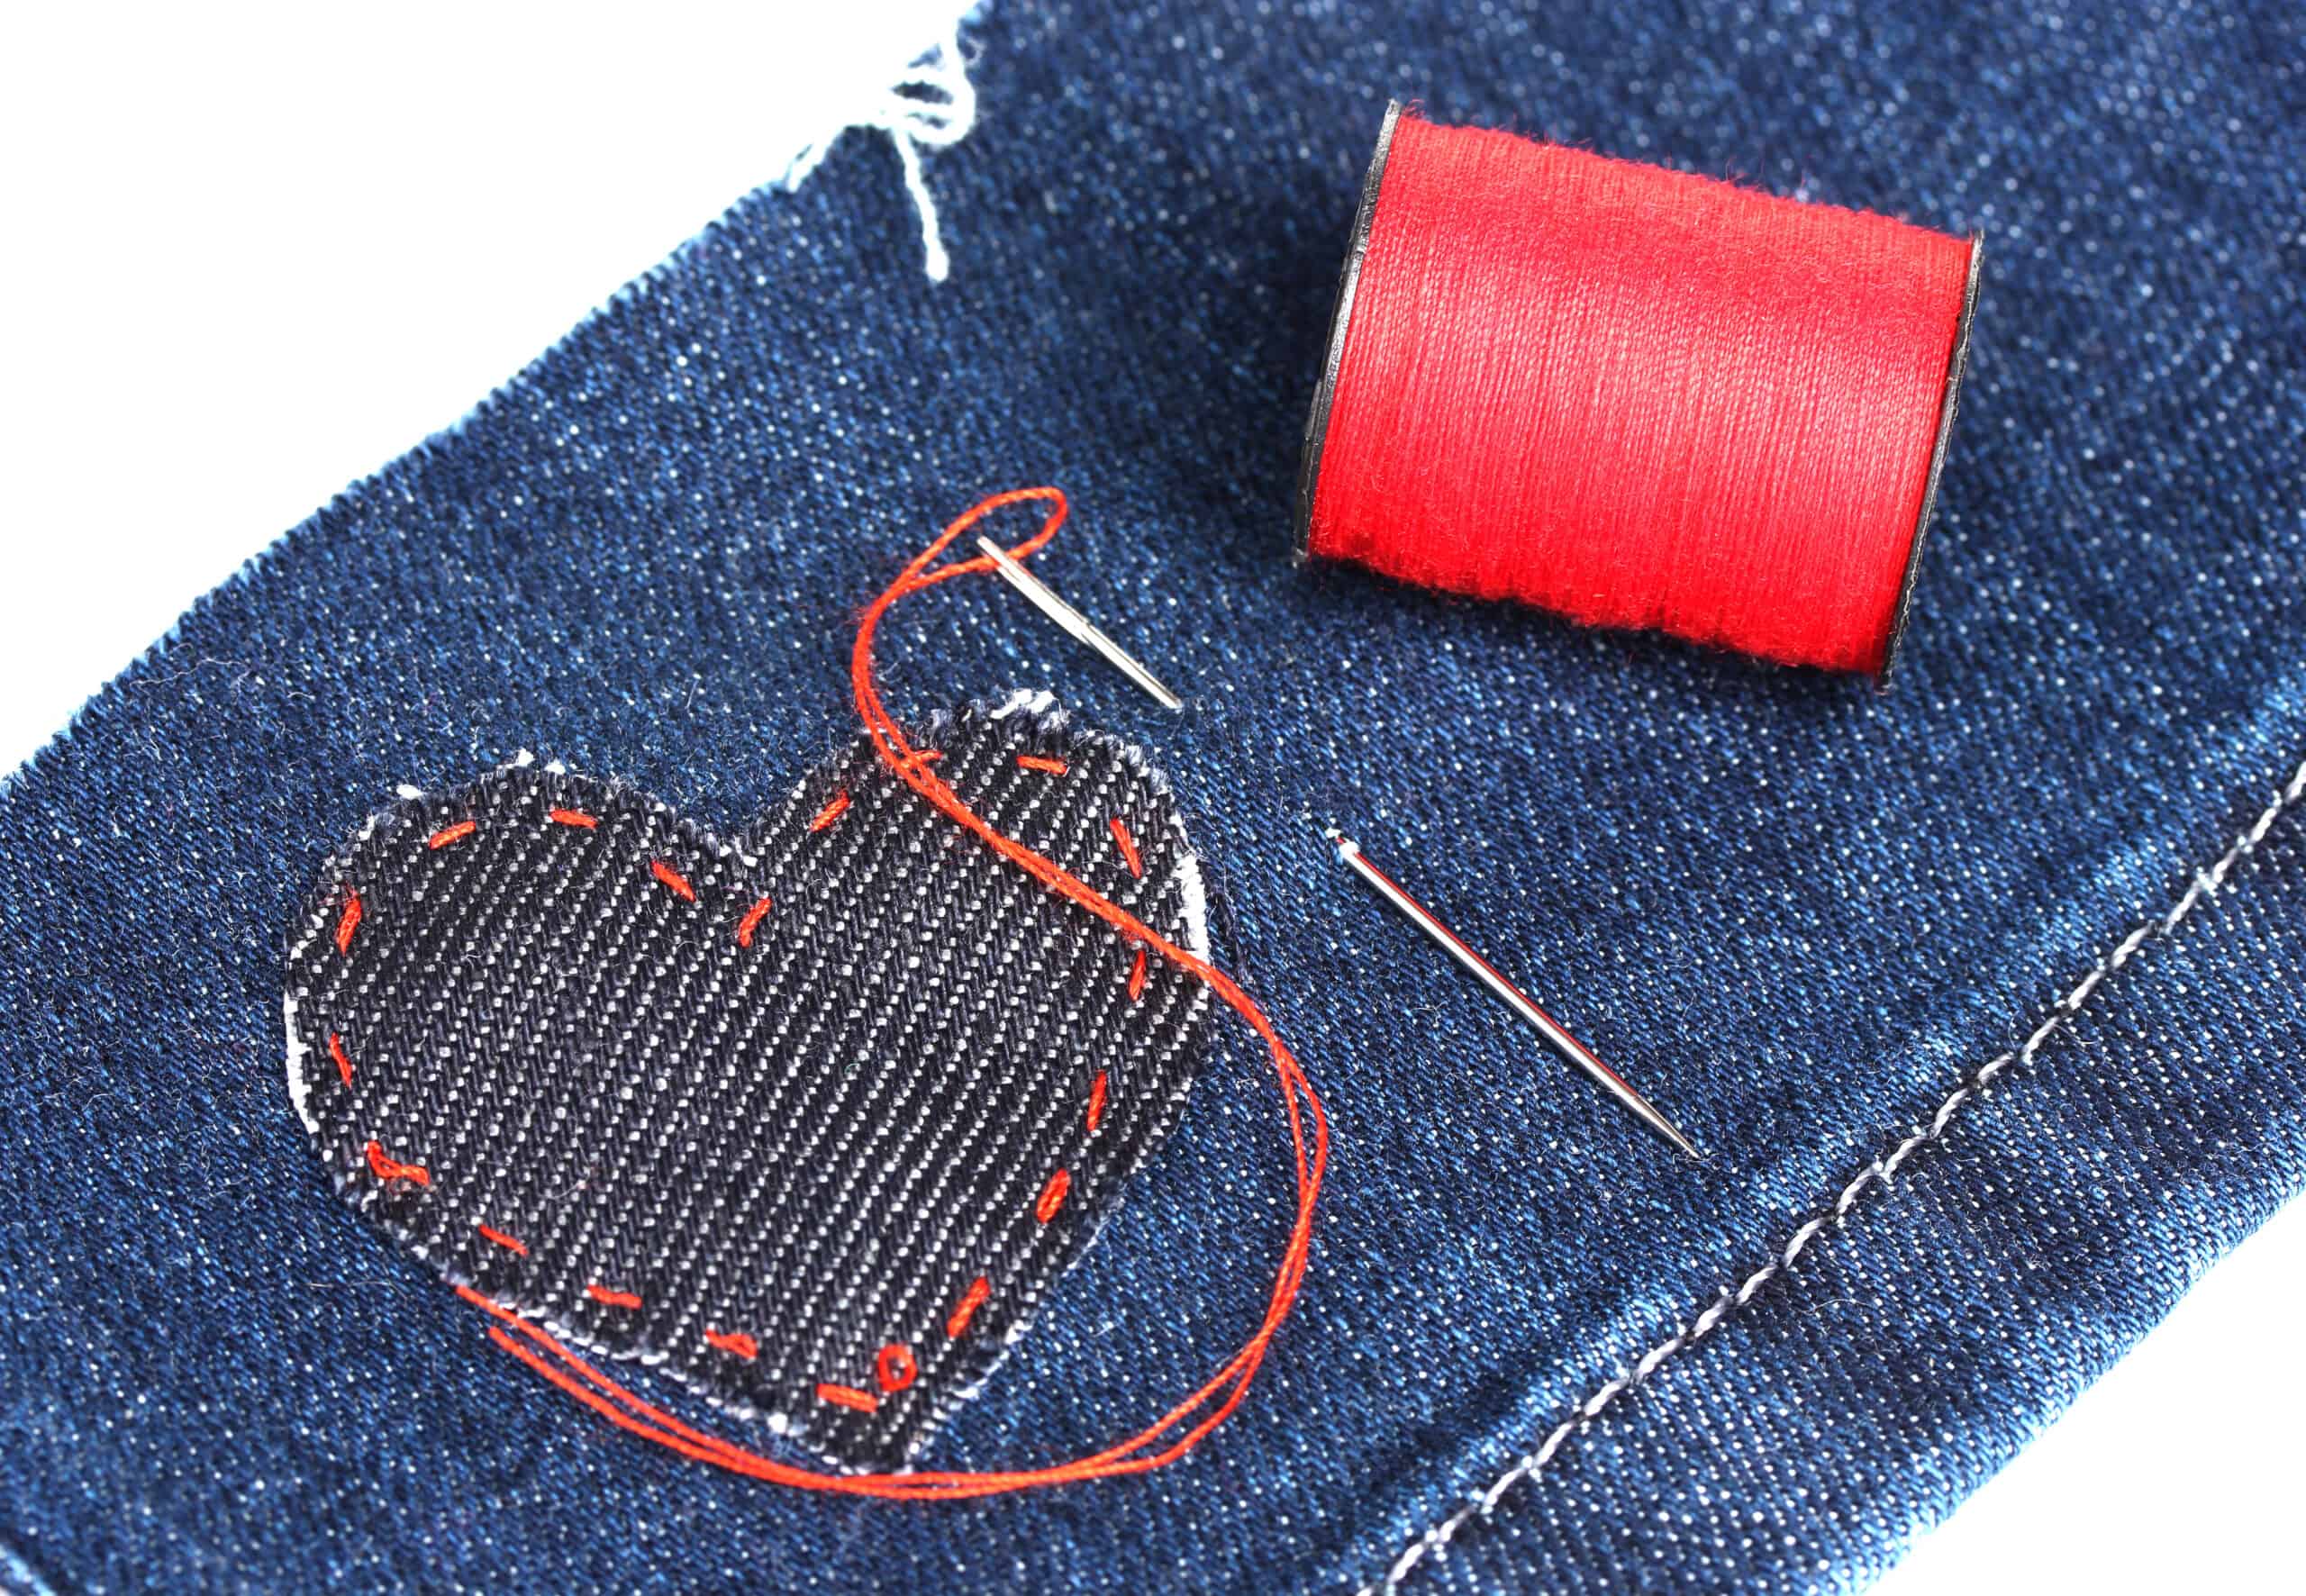 How to Sew on a Patch